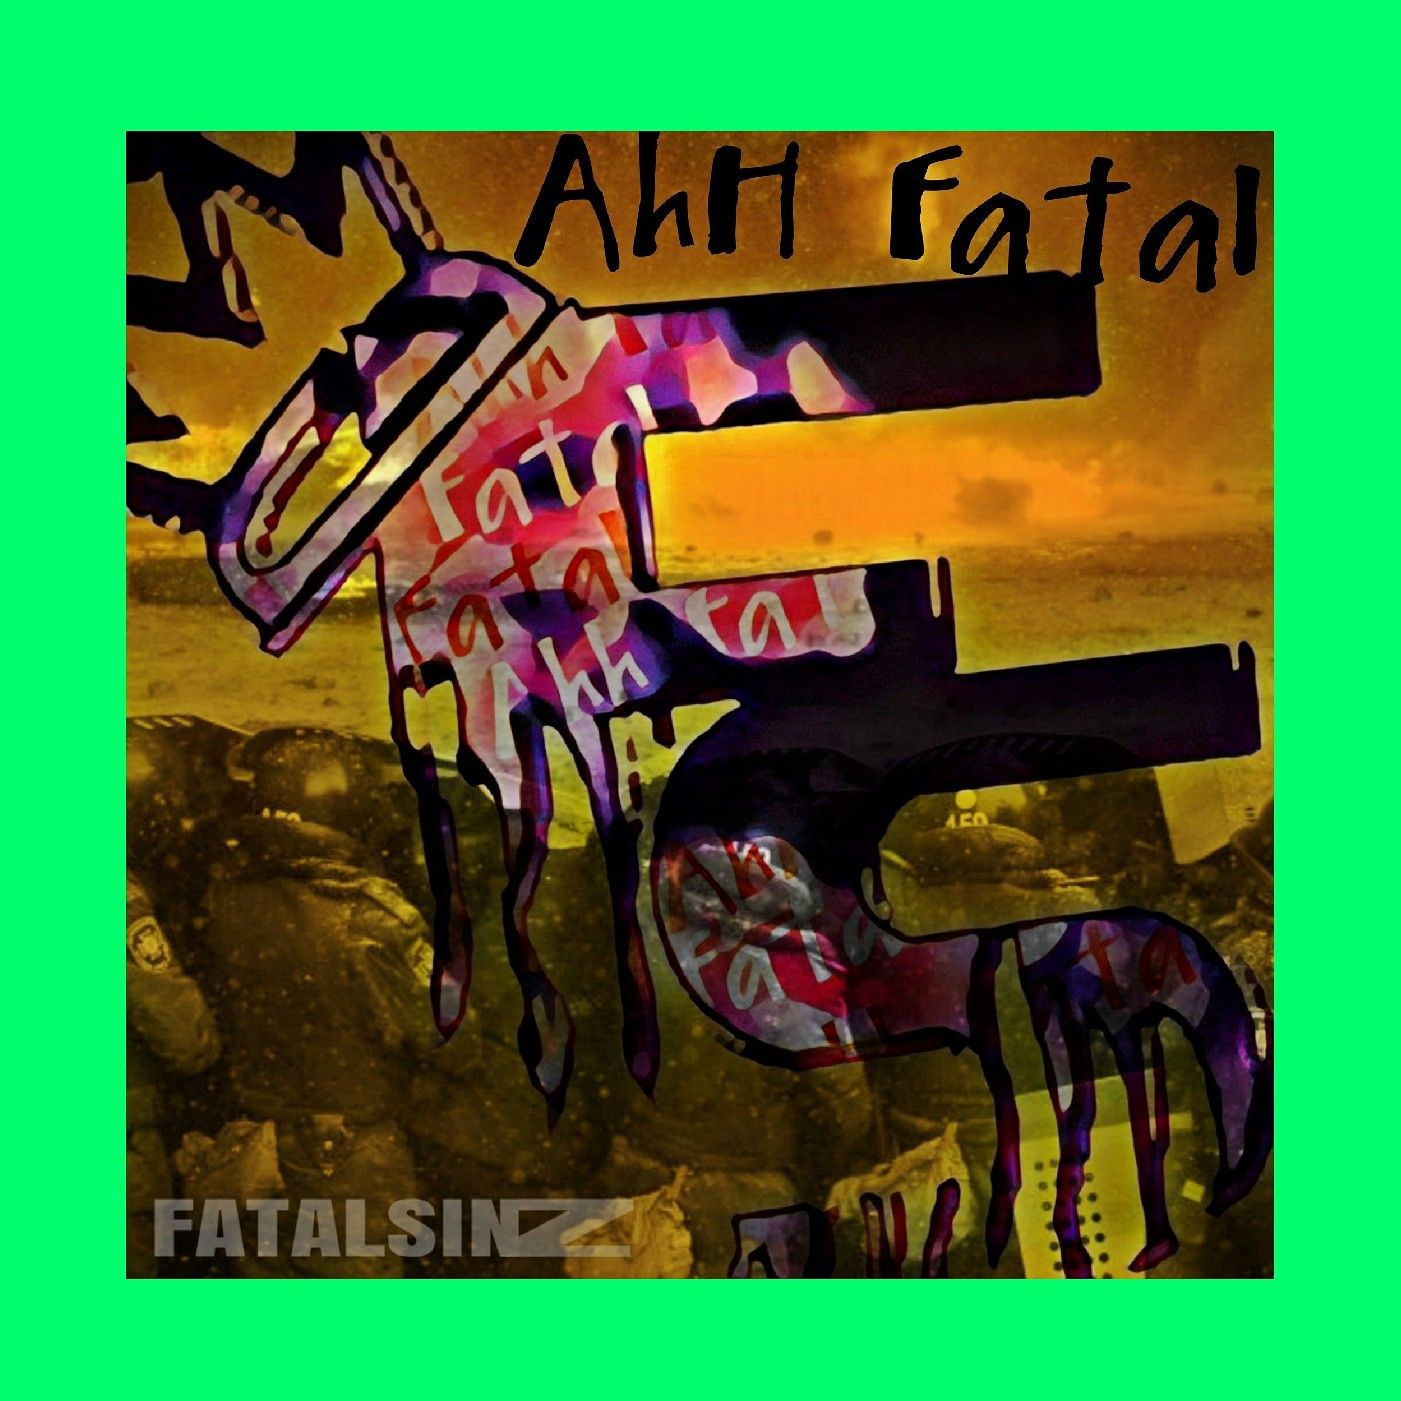 New workout single Ahh Fatal By Fatal Sinz